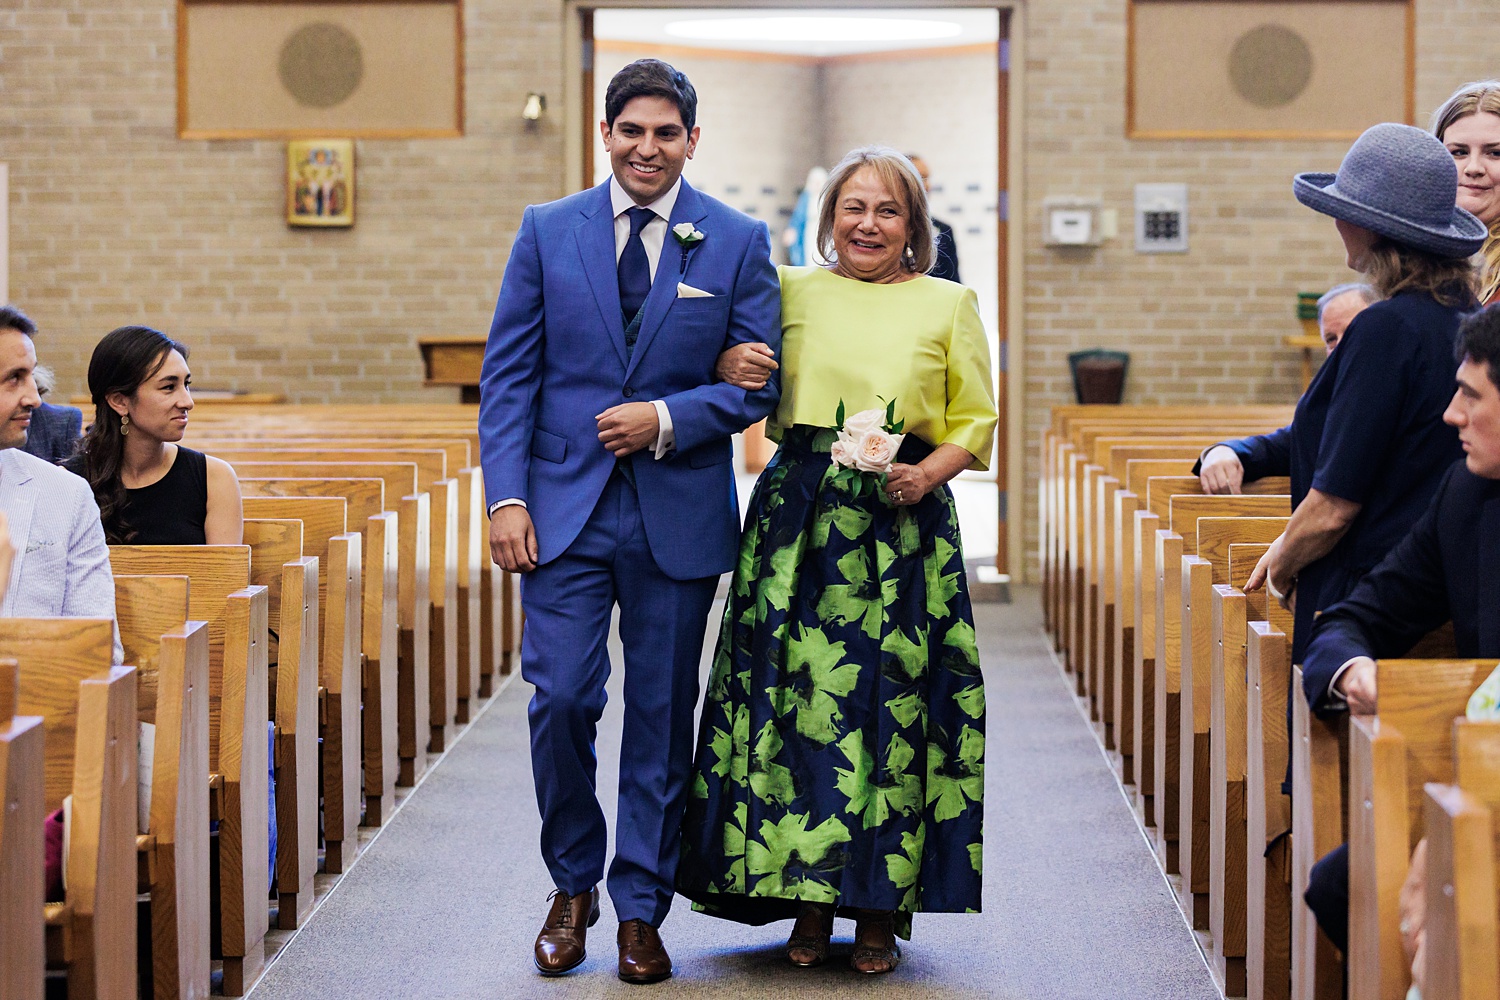 The groom and his mom come down the wedding aisle